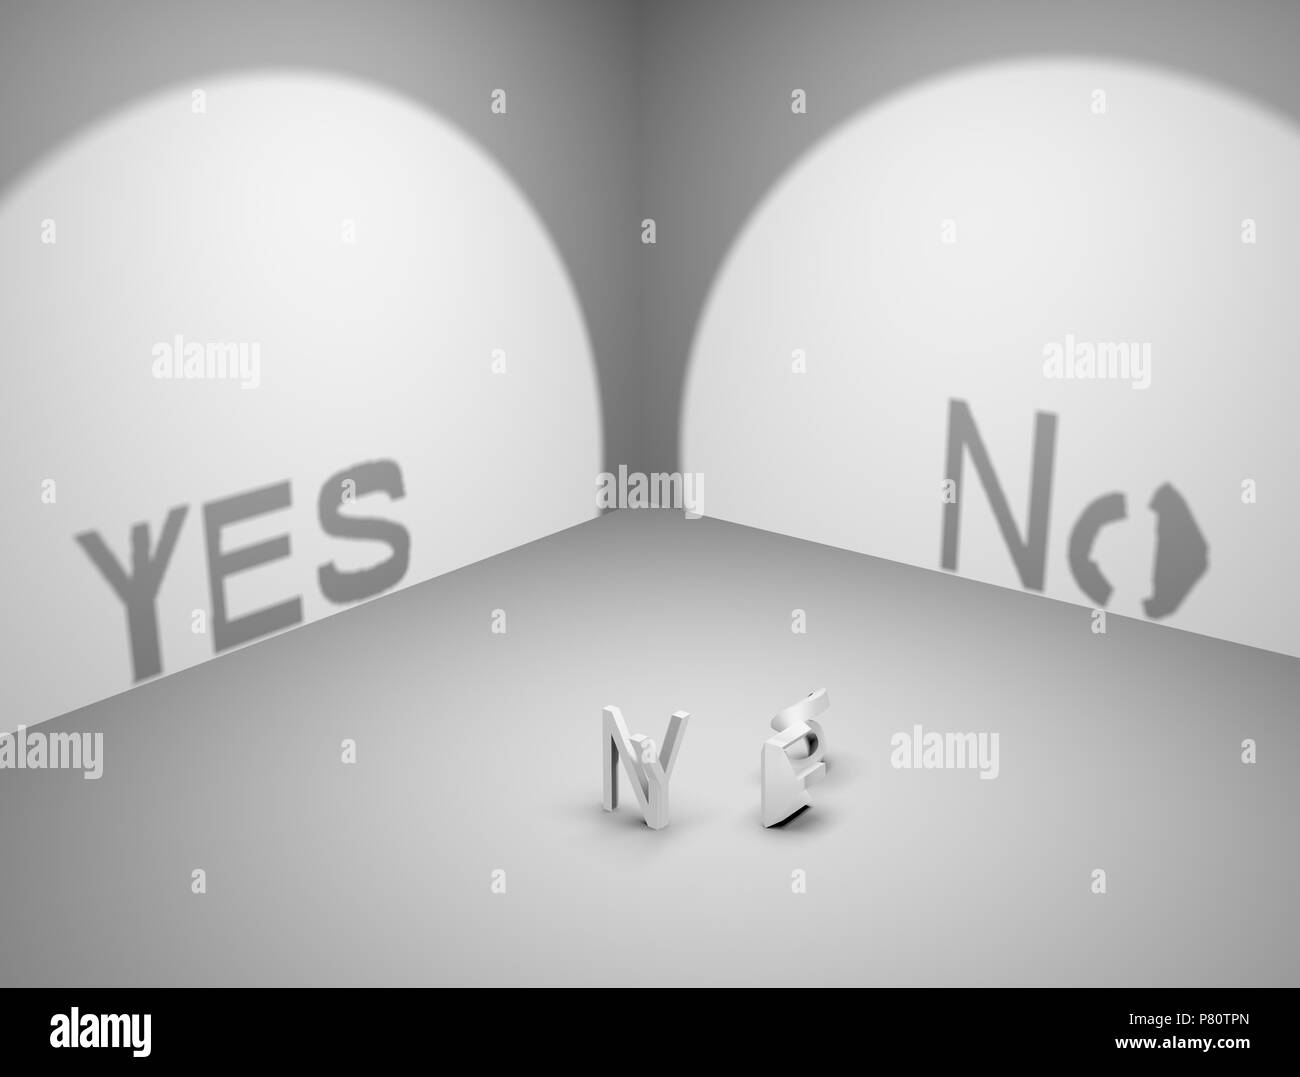 Yes or No text in shadow for choice Stock Photo